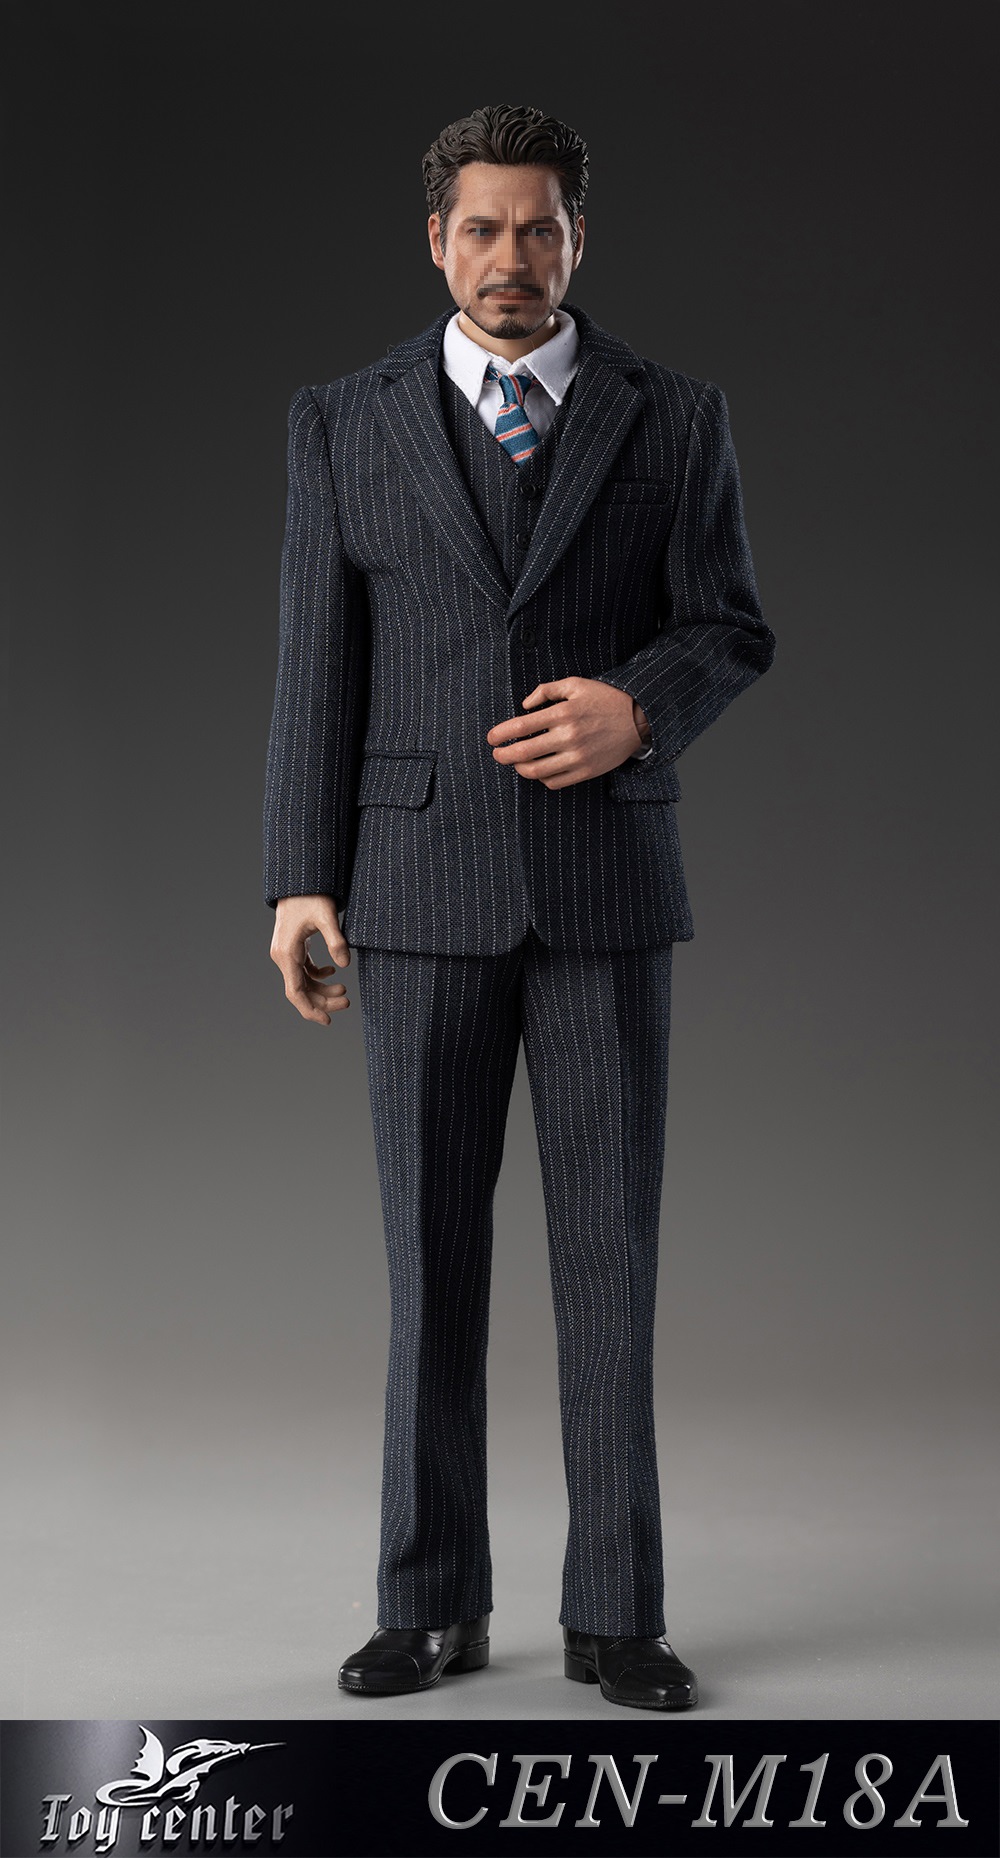 NEW PRODUCT: Toy center: 1/6 British Gentleman Tony Striped Suit CEN-M18 Three Colors 15522712